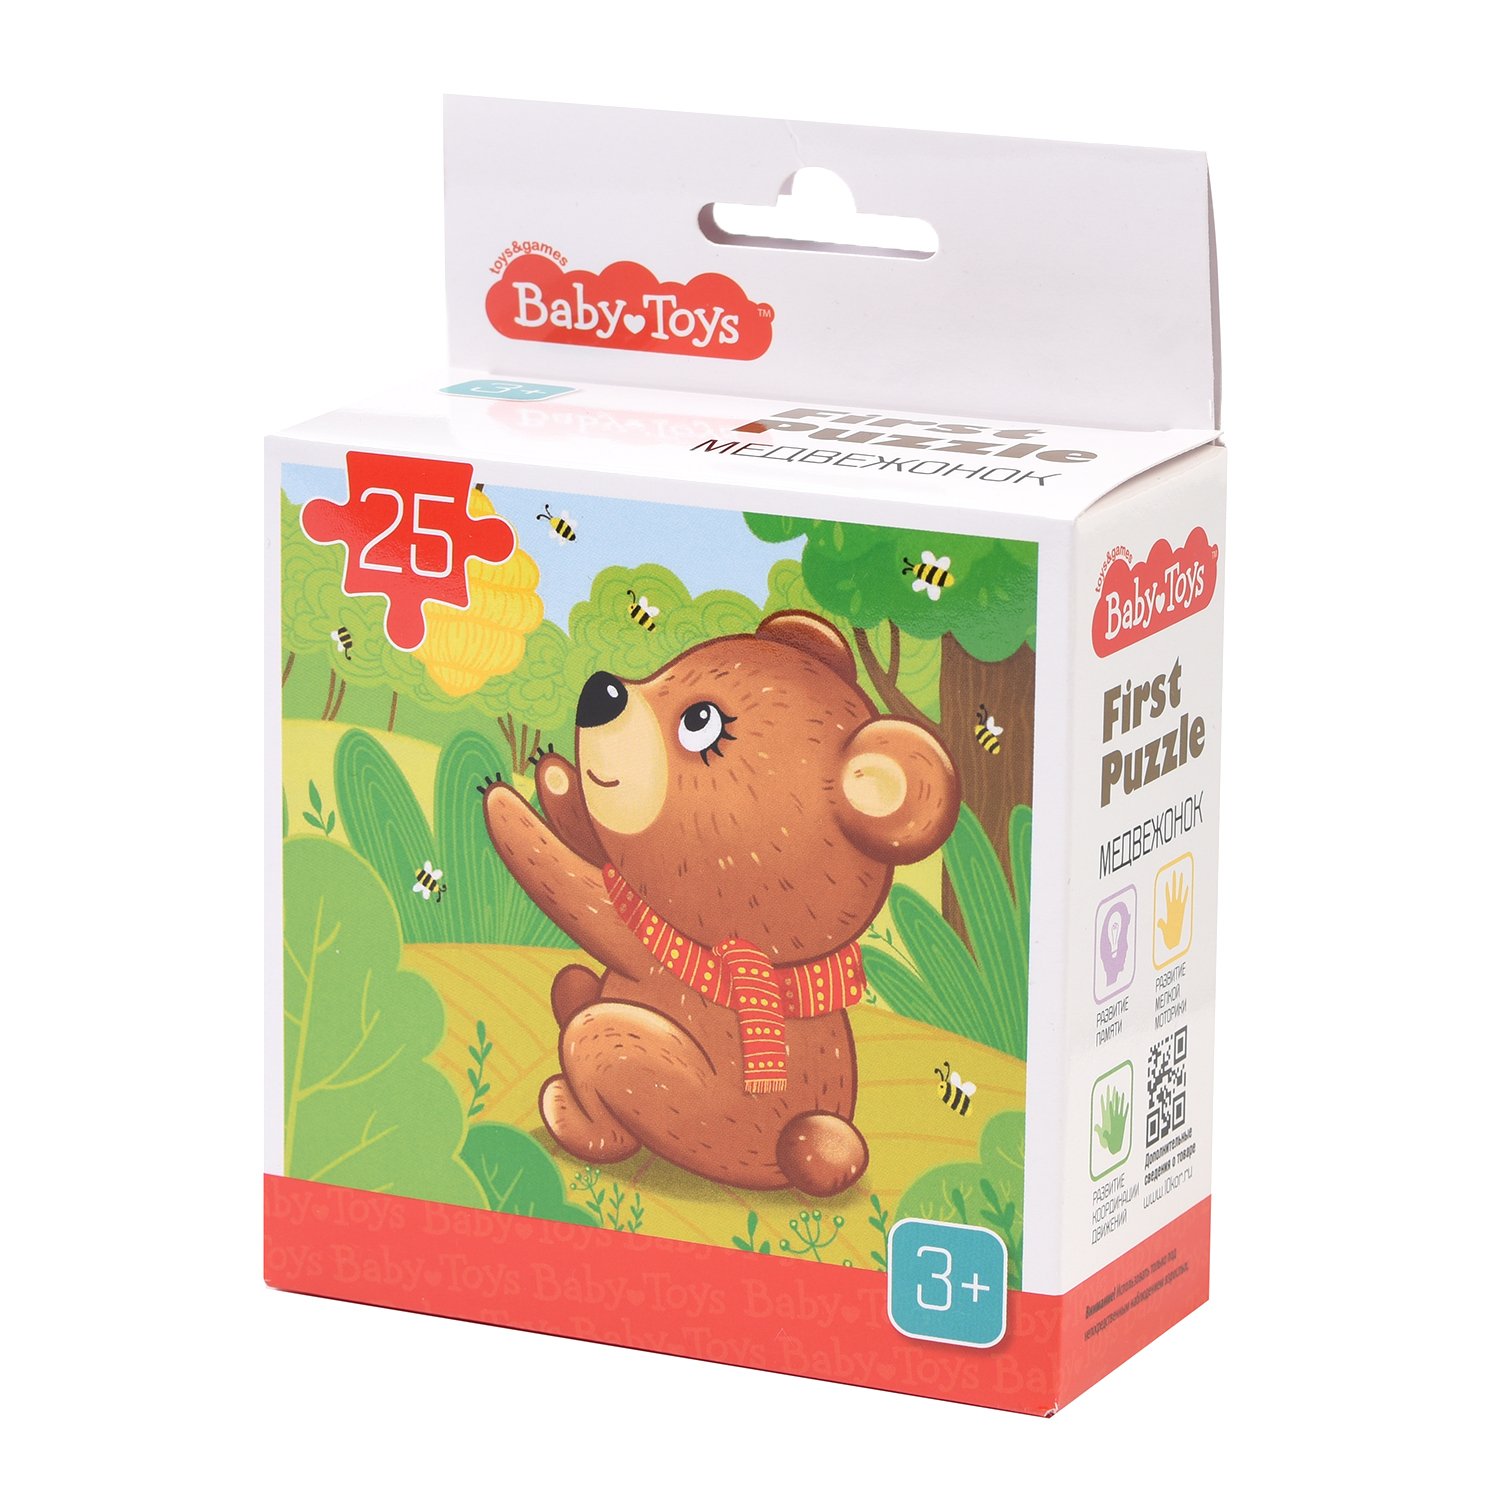 Пазл First Puzzle Медвежонок (25 эл) Baby Toys арт.04291